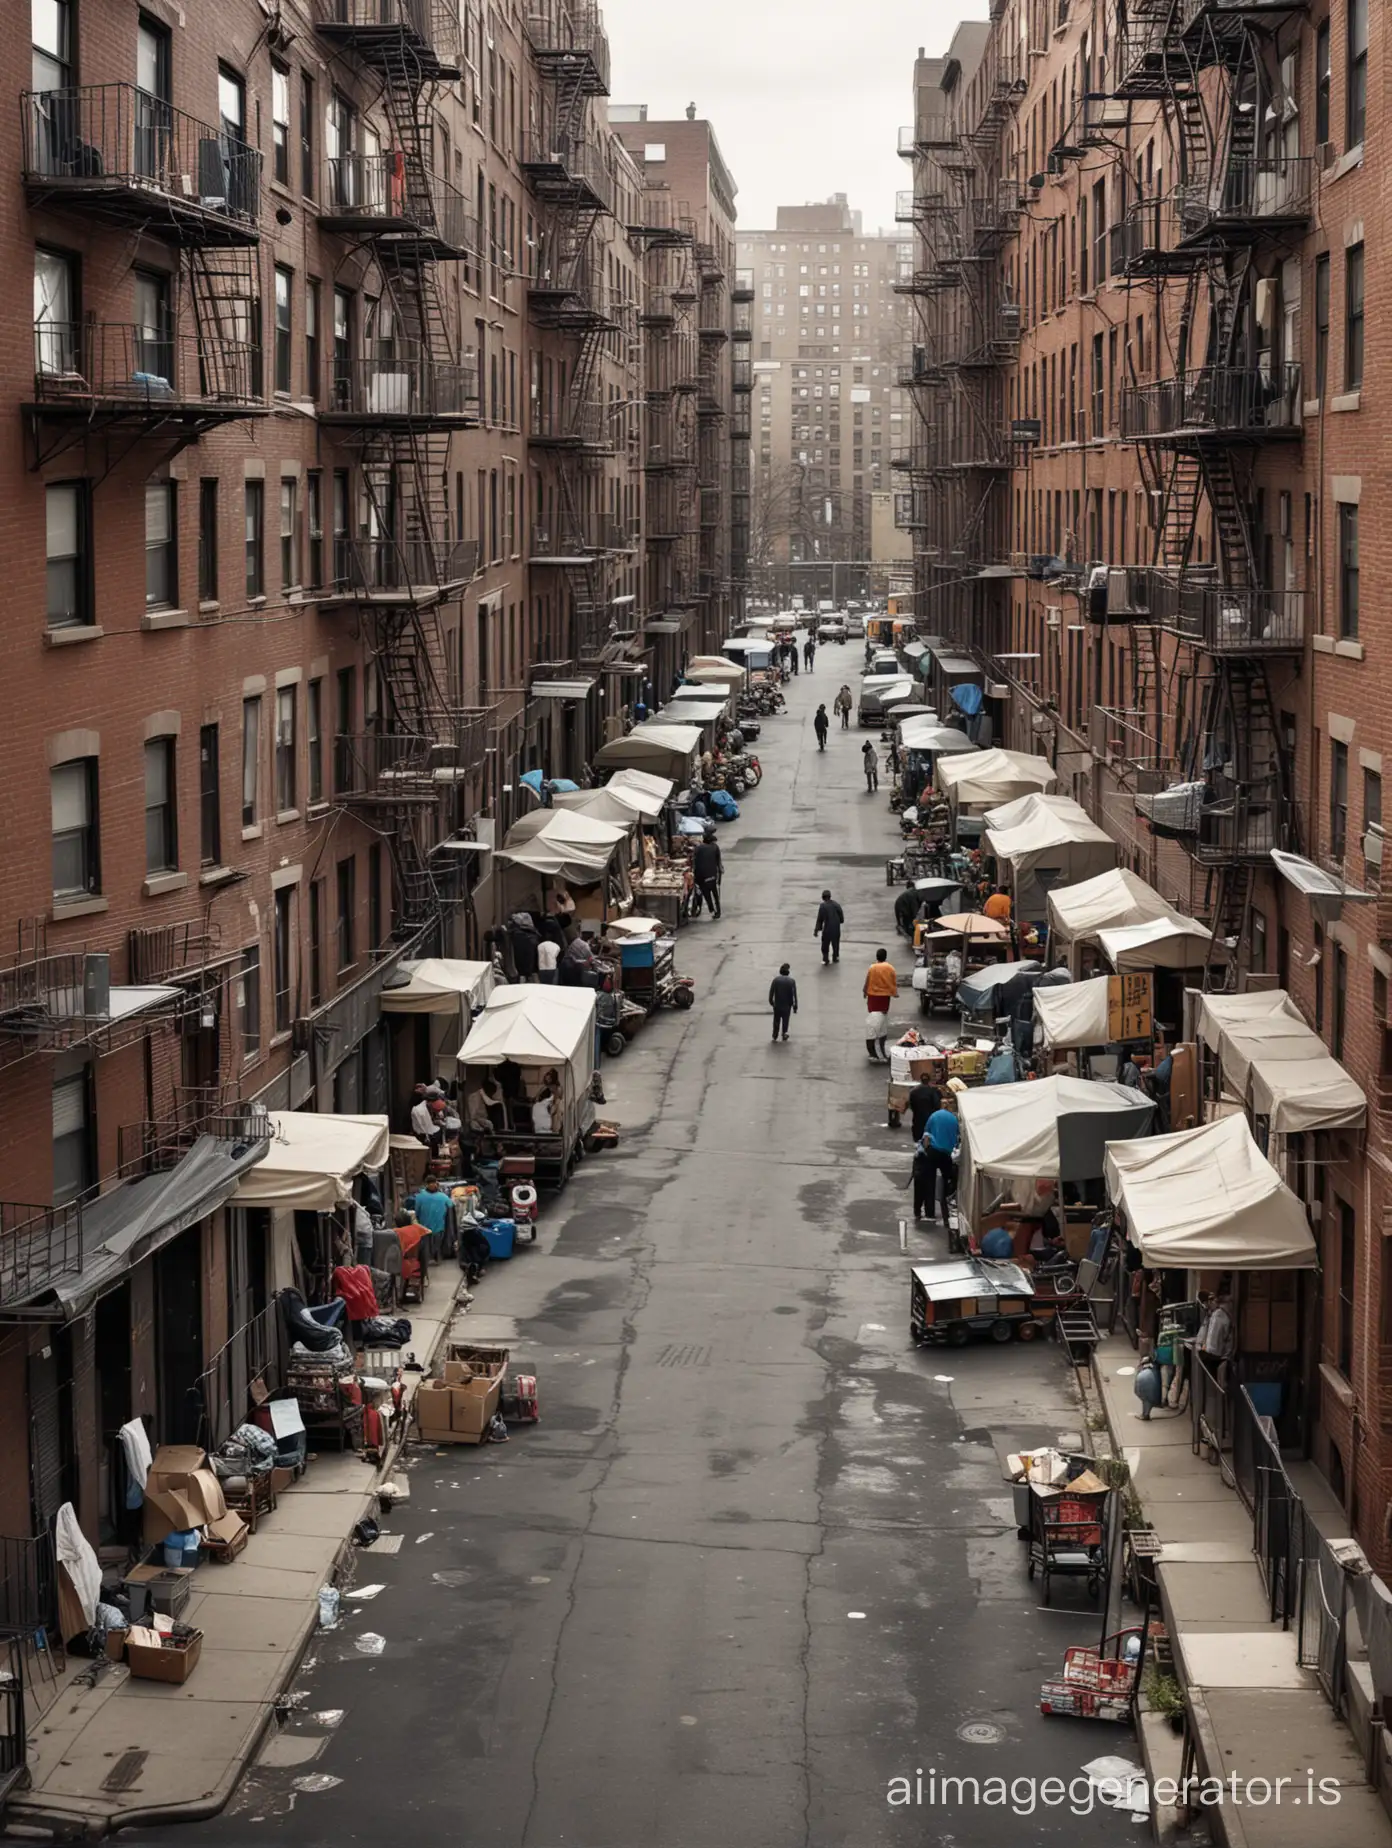 realistic photo of view from an apartment in the ghetto of nyc, public housing,  a few people in street fighting, homeless tents and shopping carts